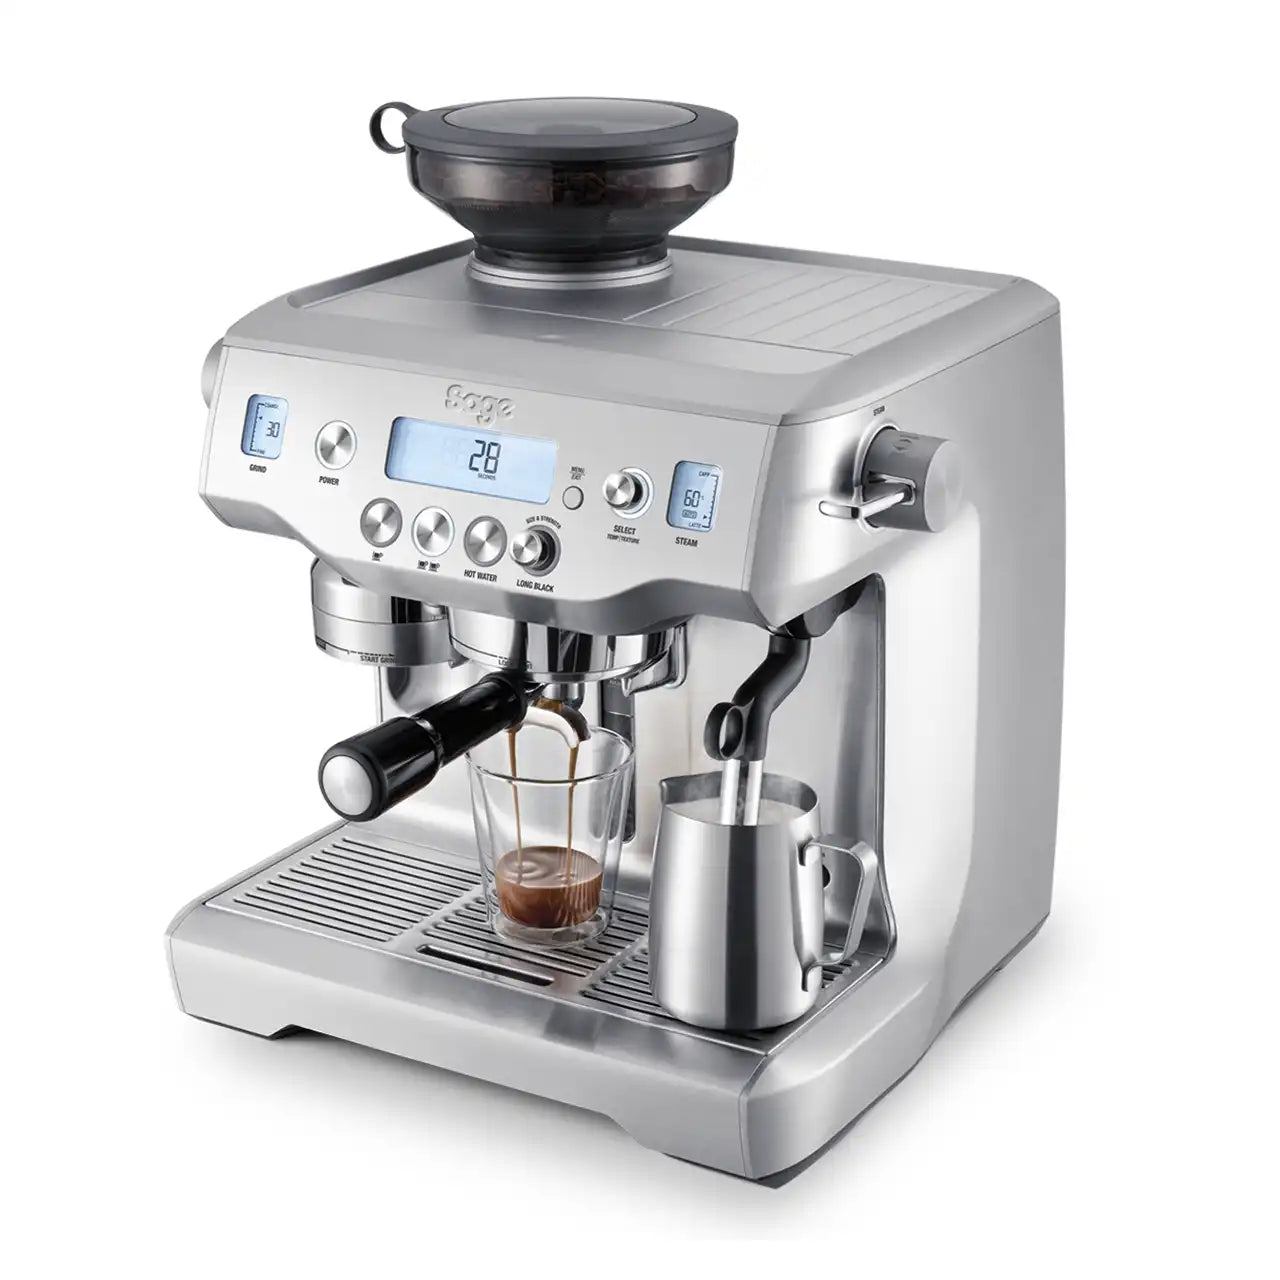 Ground Coffee Society Sage The Oracle Espresso Machine Brushed Stainless Steel